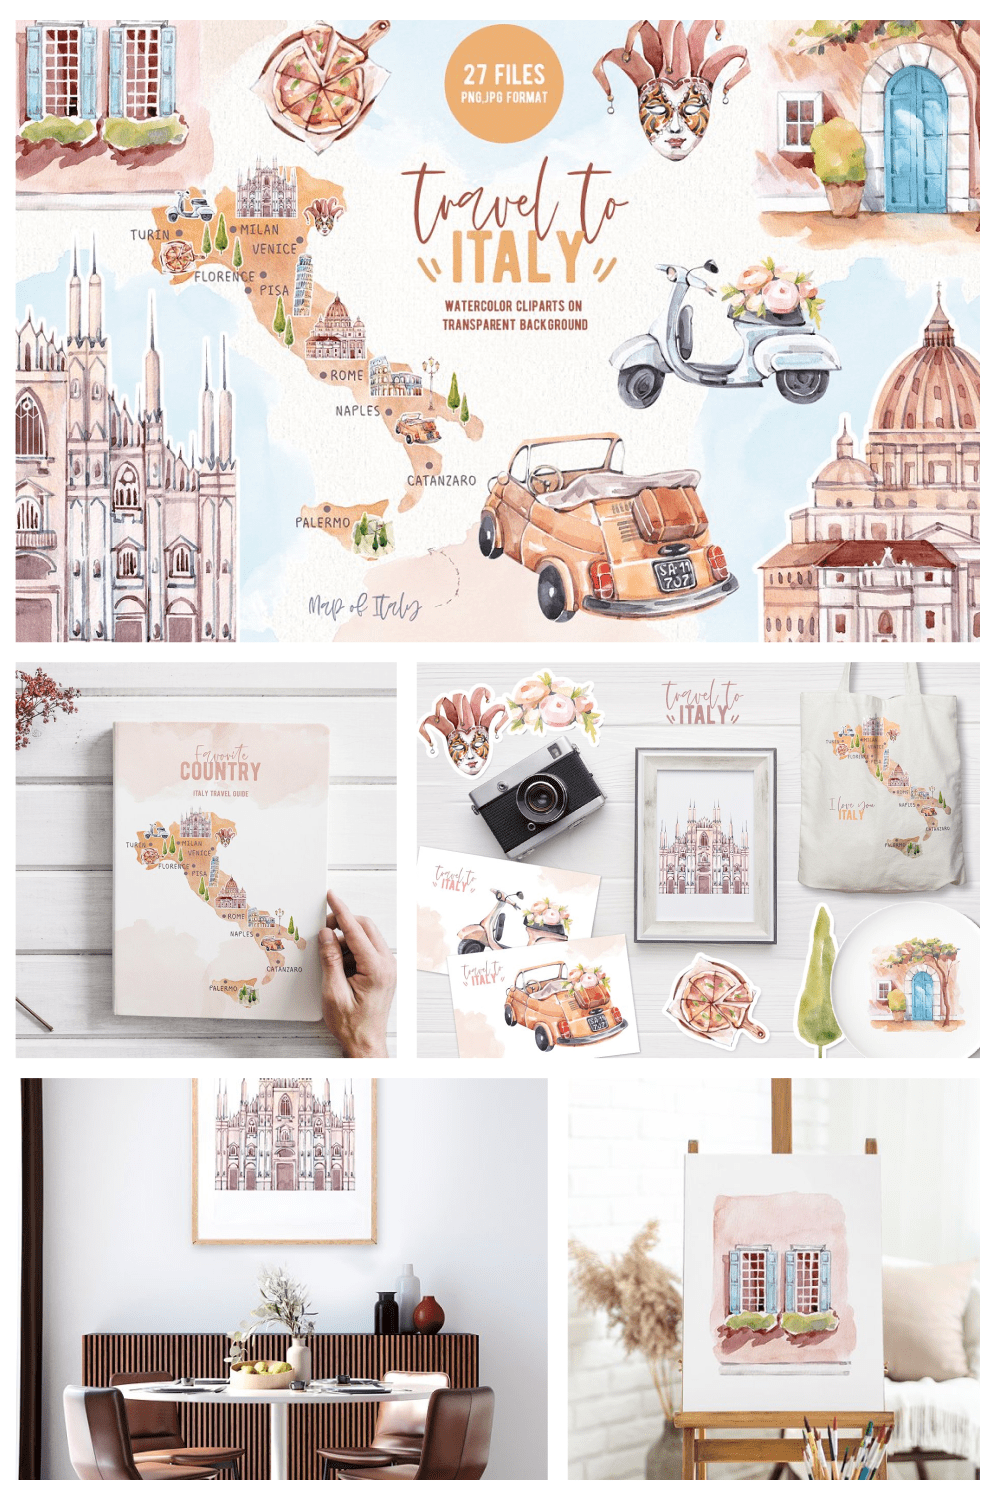 Travel To Italy Watercolor Clipart pint1.